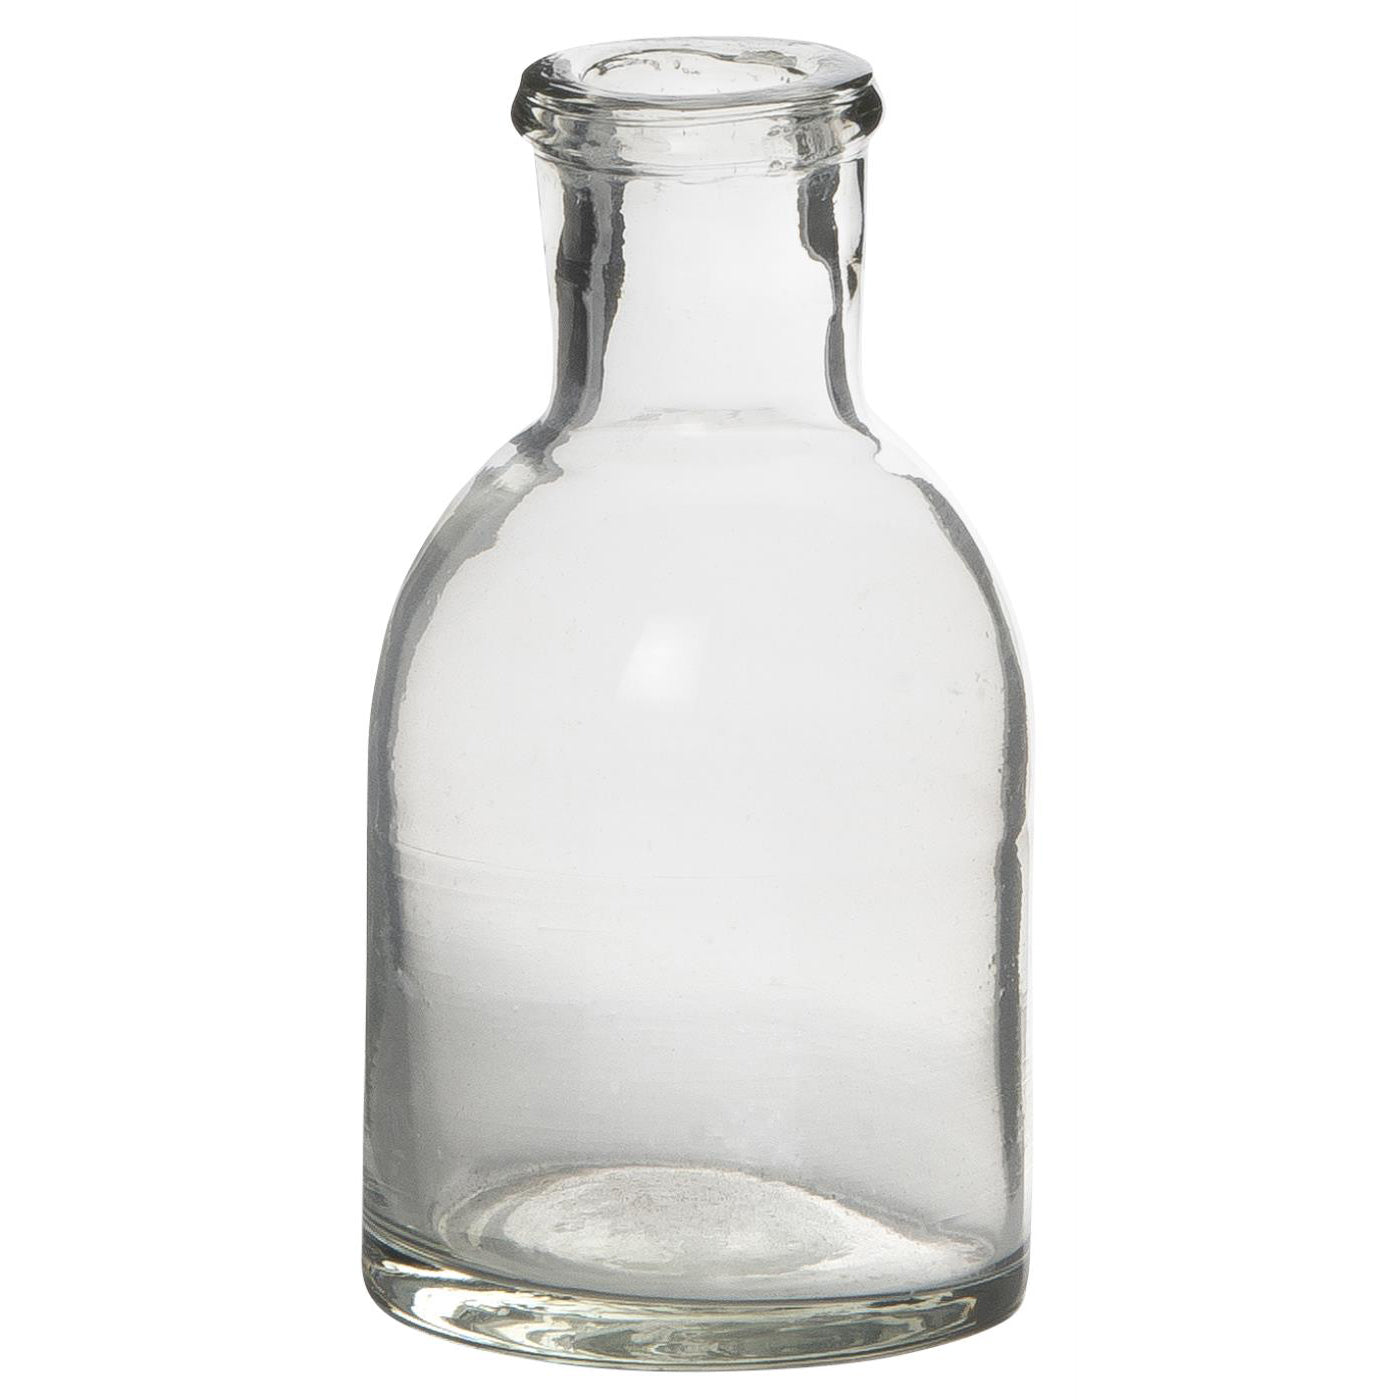 Small Glass Apothecary Bottle or Candle Holder - Simple